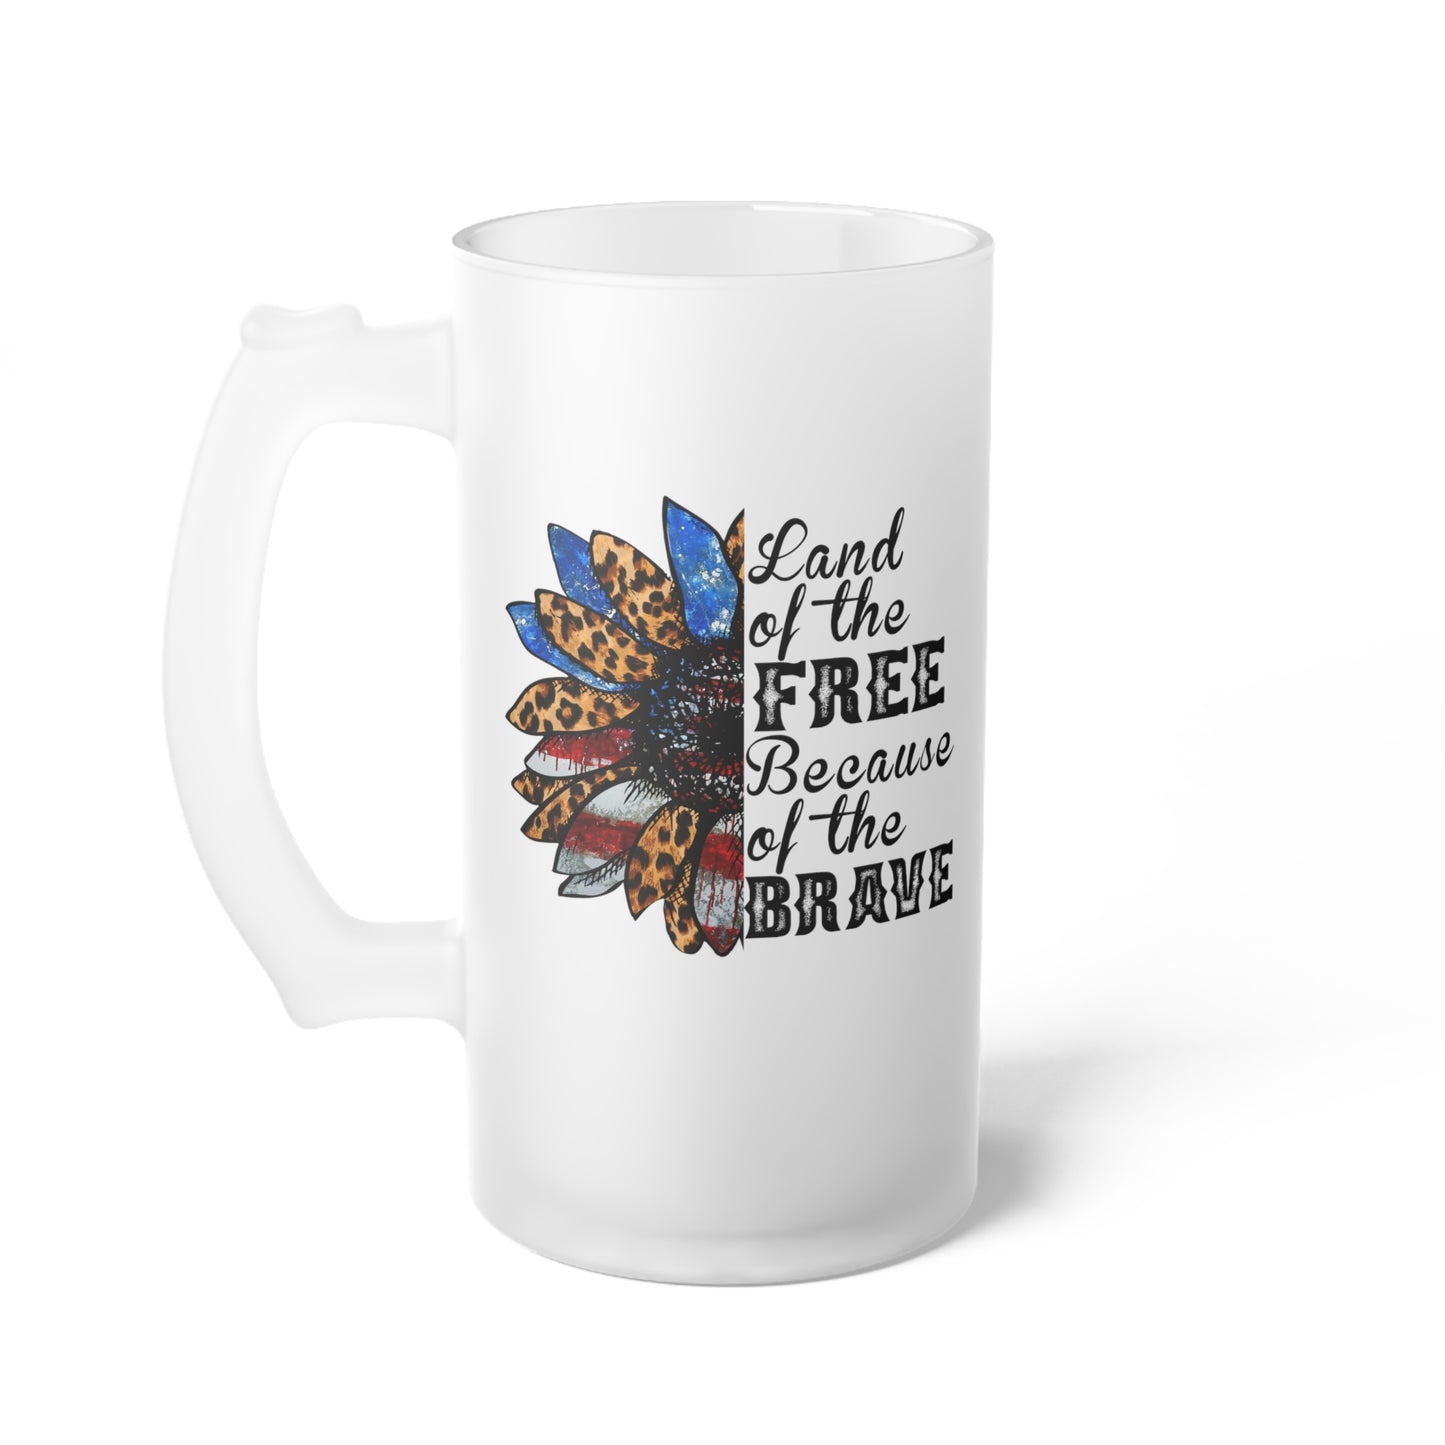 Land of The Free Because of the Brave Frosted Glass Beer Mug